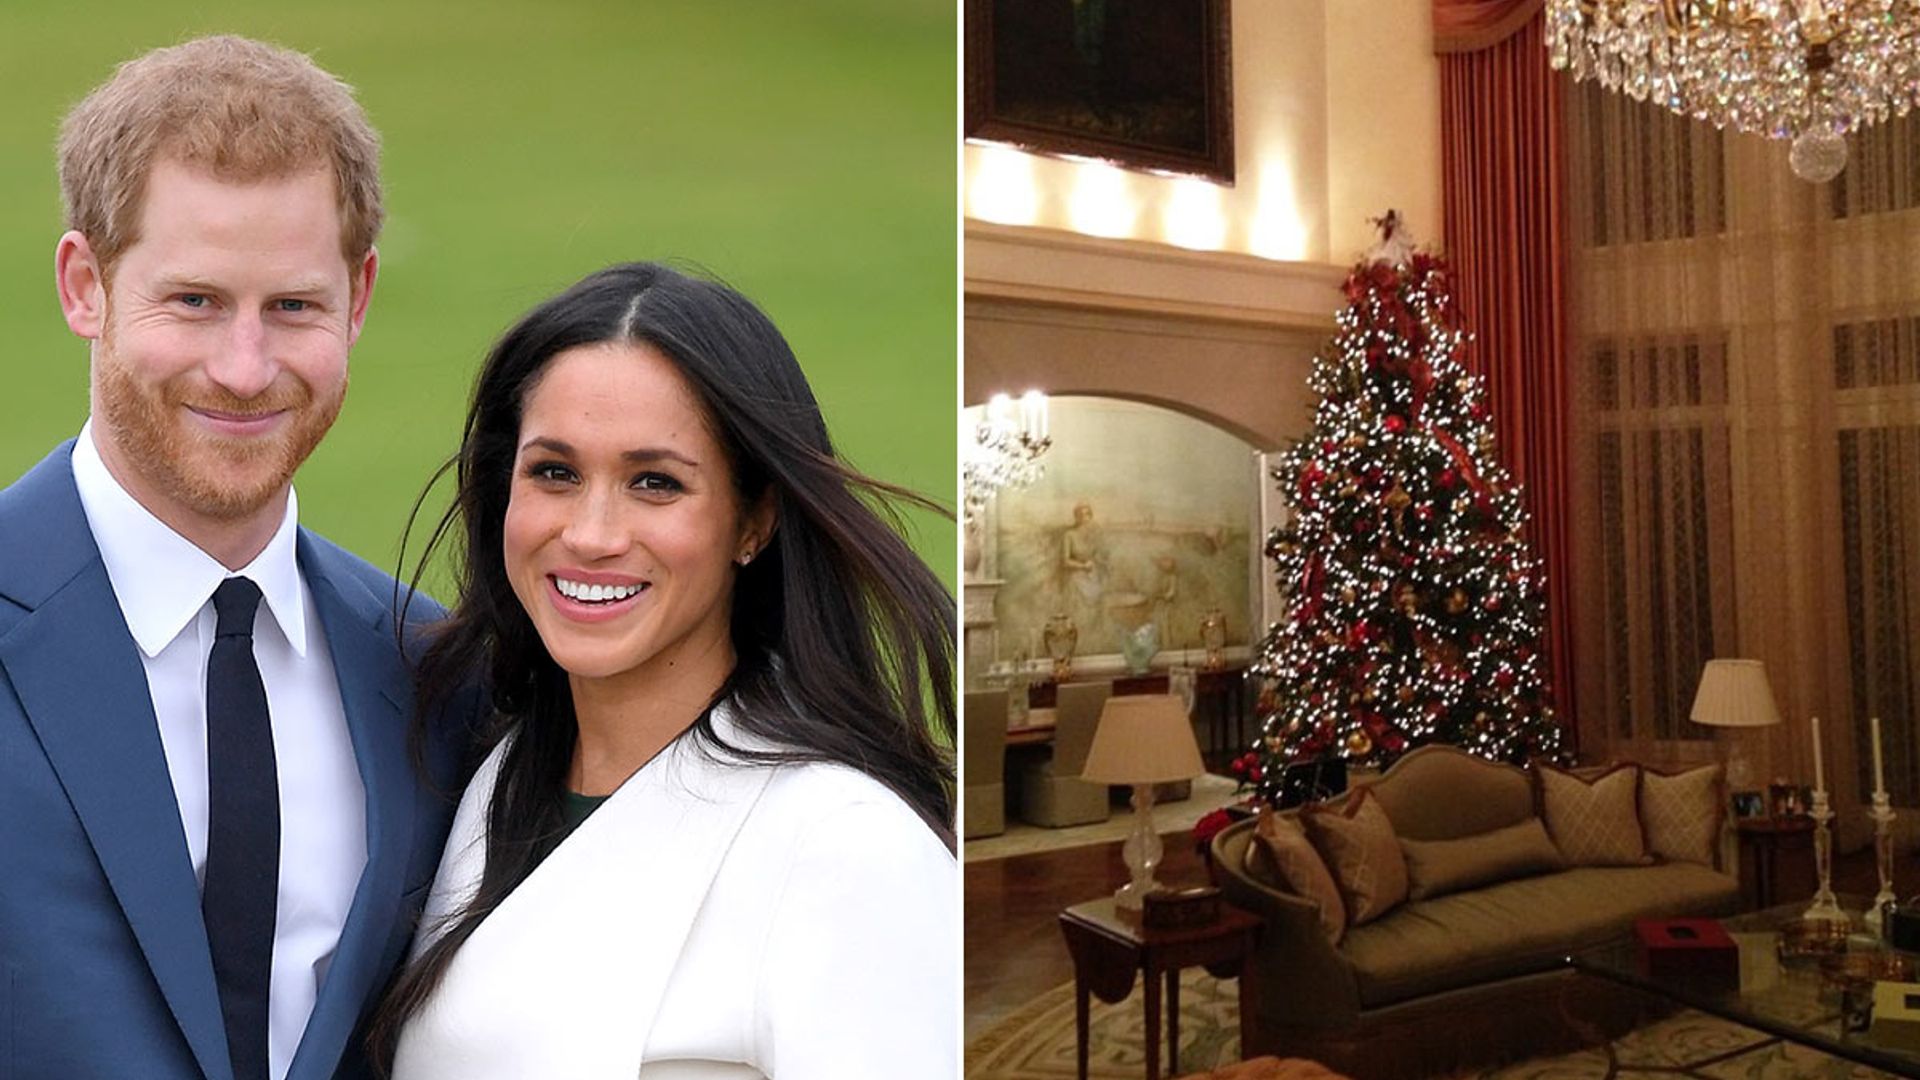 Prince Harry and Meghan Markle's living room unveiled: see inside their temporary LA home